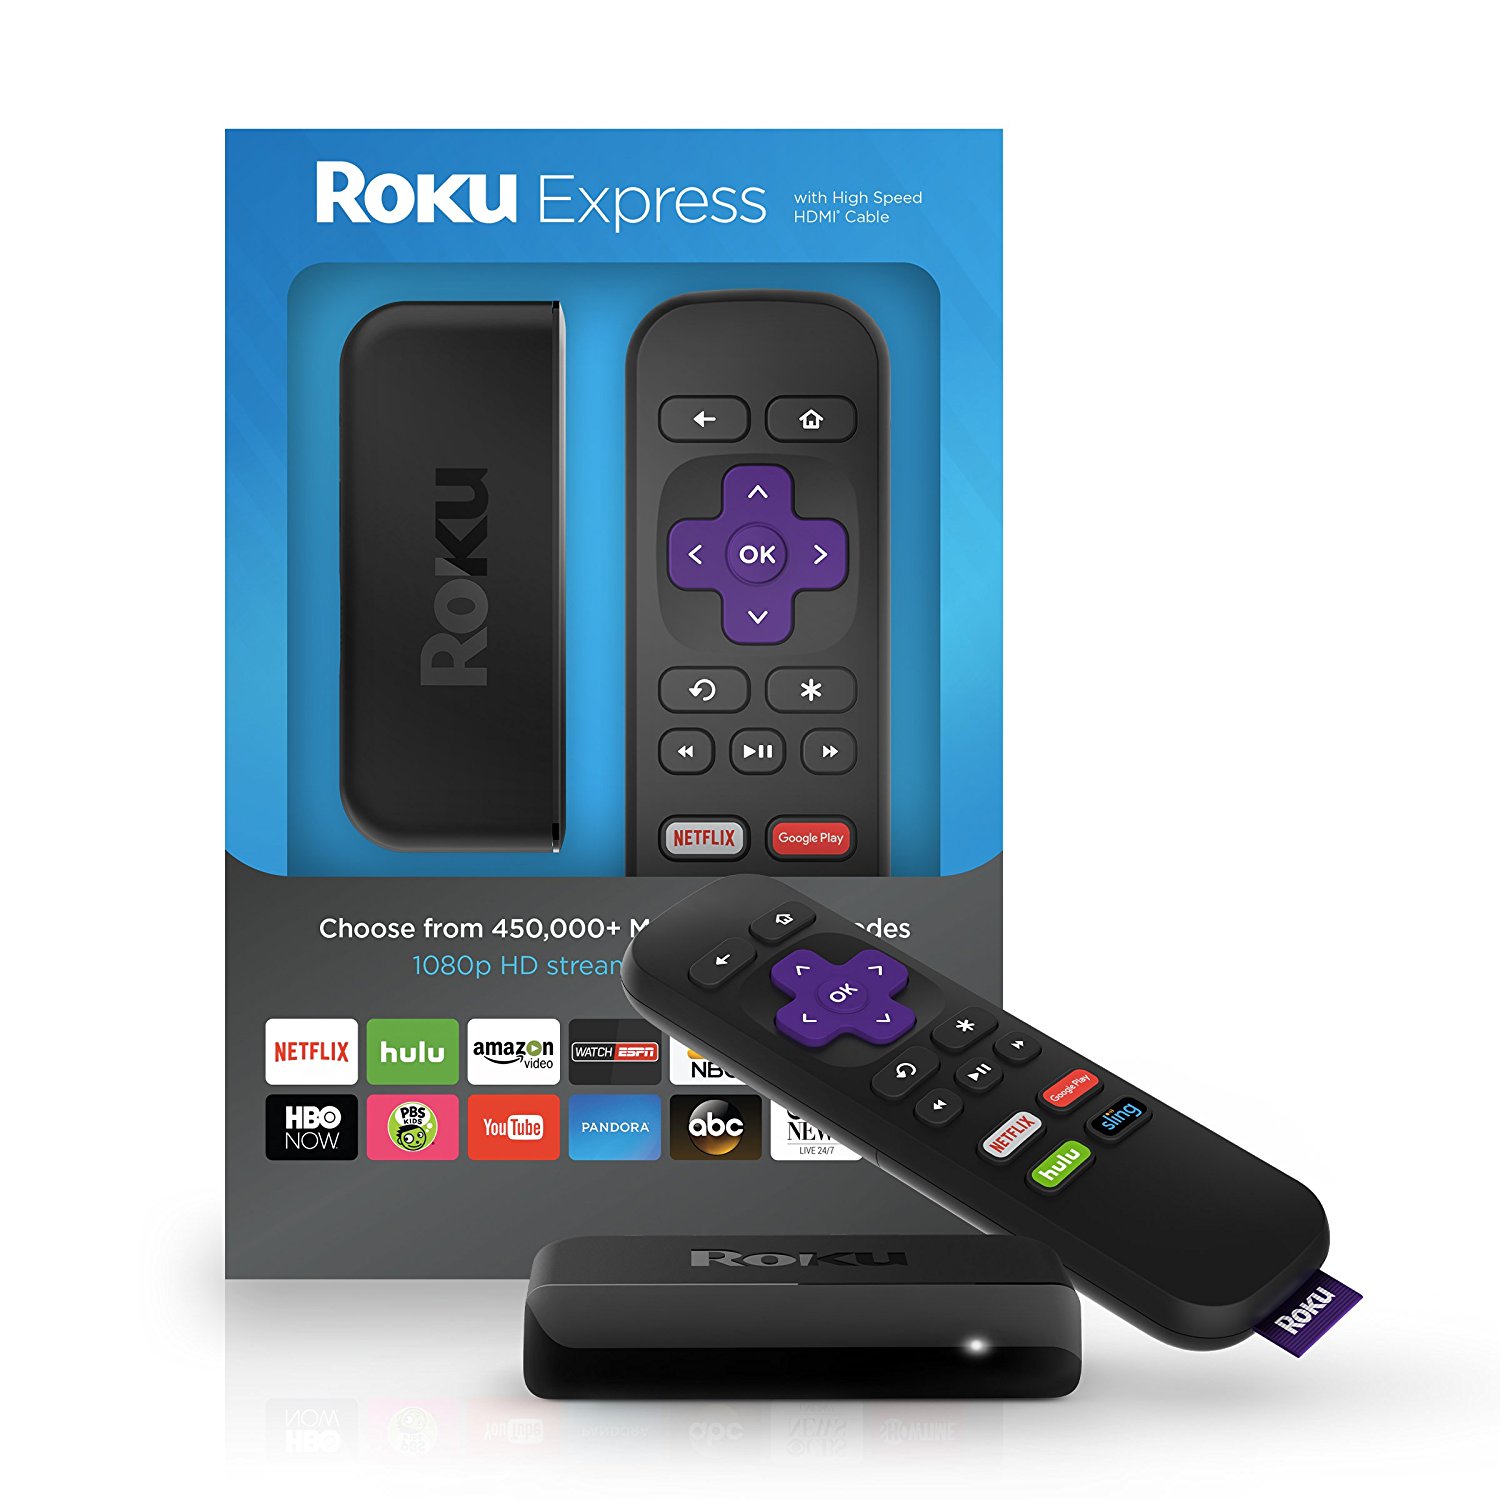 Roku Express Now Only $24.99 on Amazon!